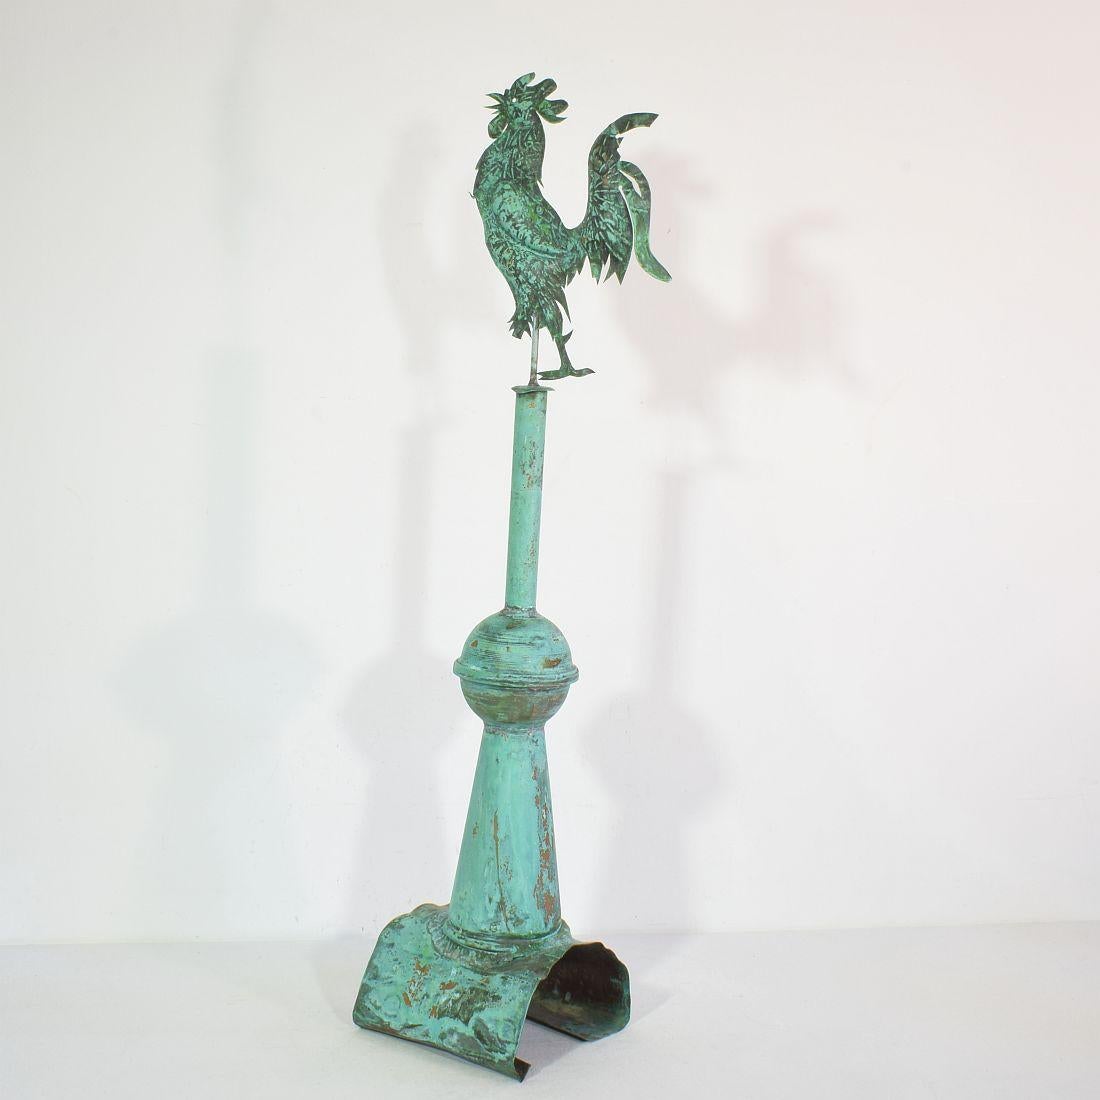 Hand-Crafted Early 20th Century, French Folk Art Copper Weathervane with Rooster